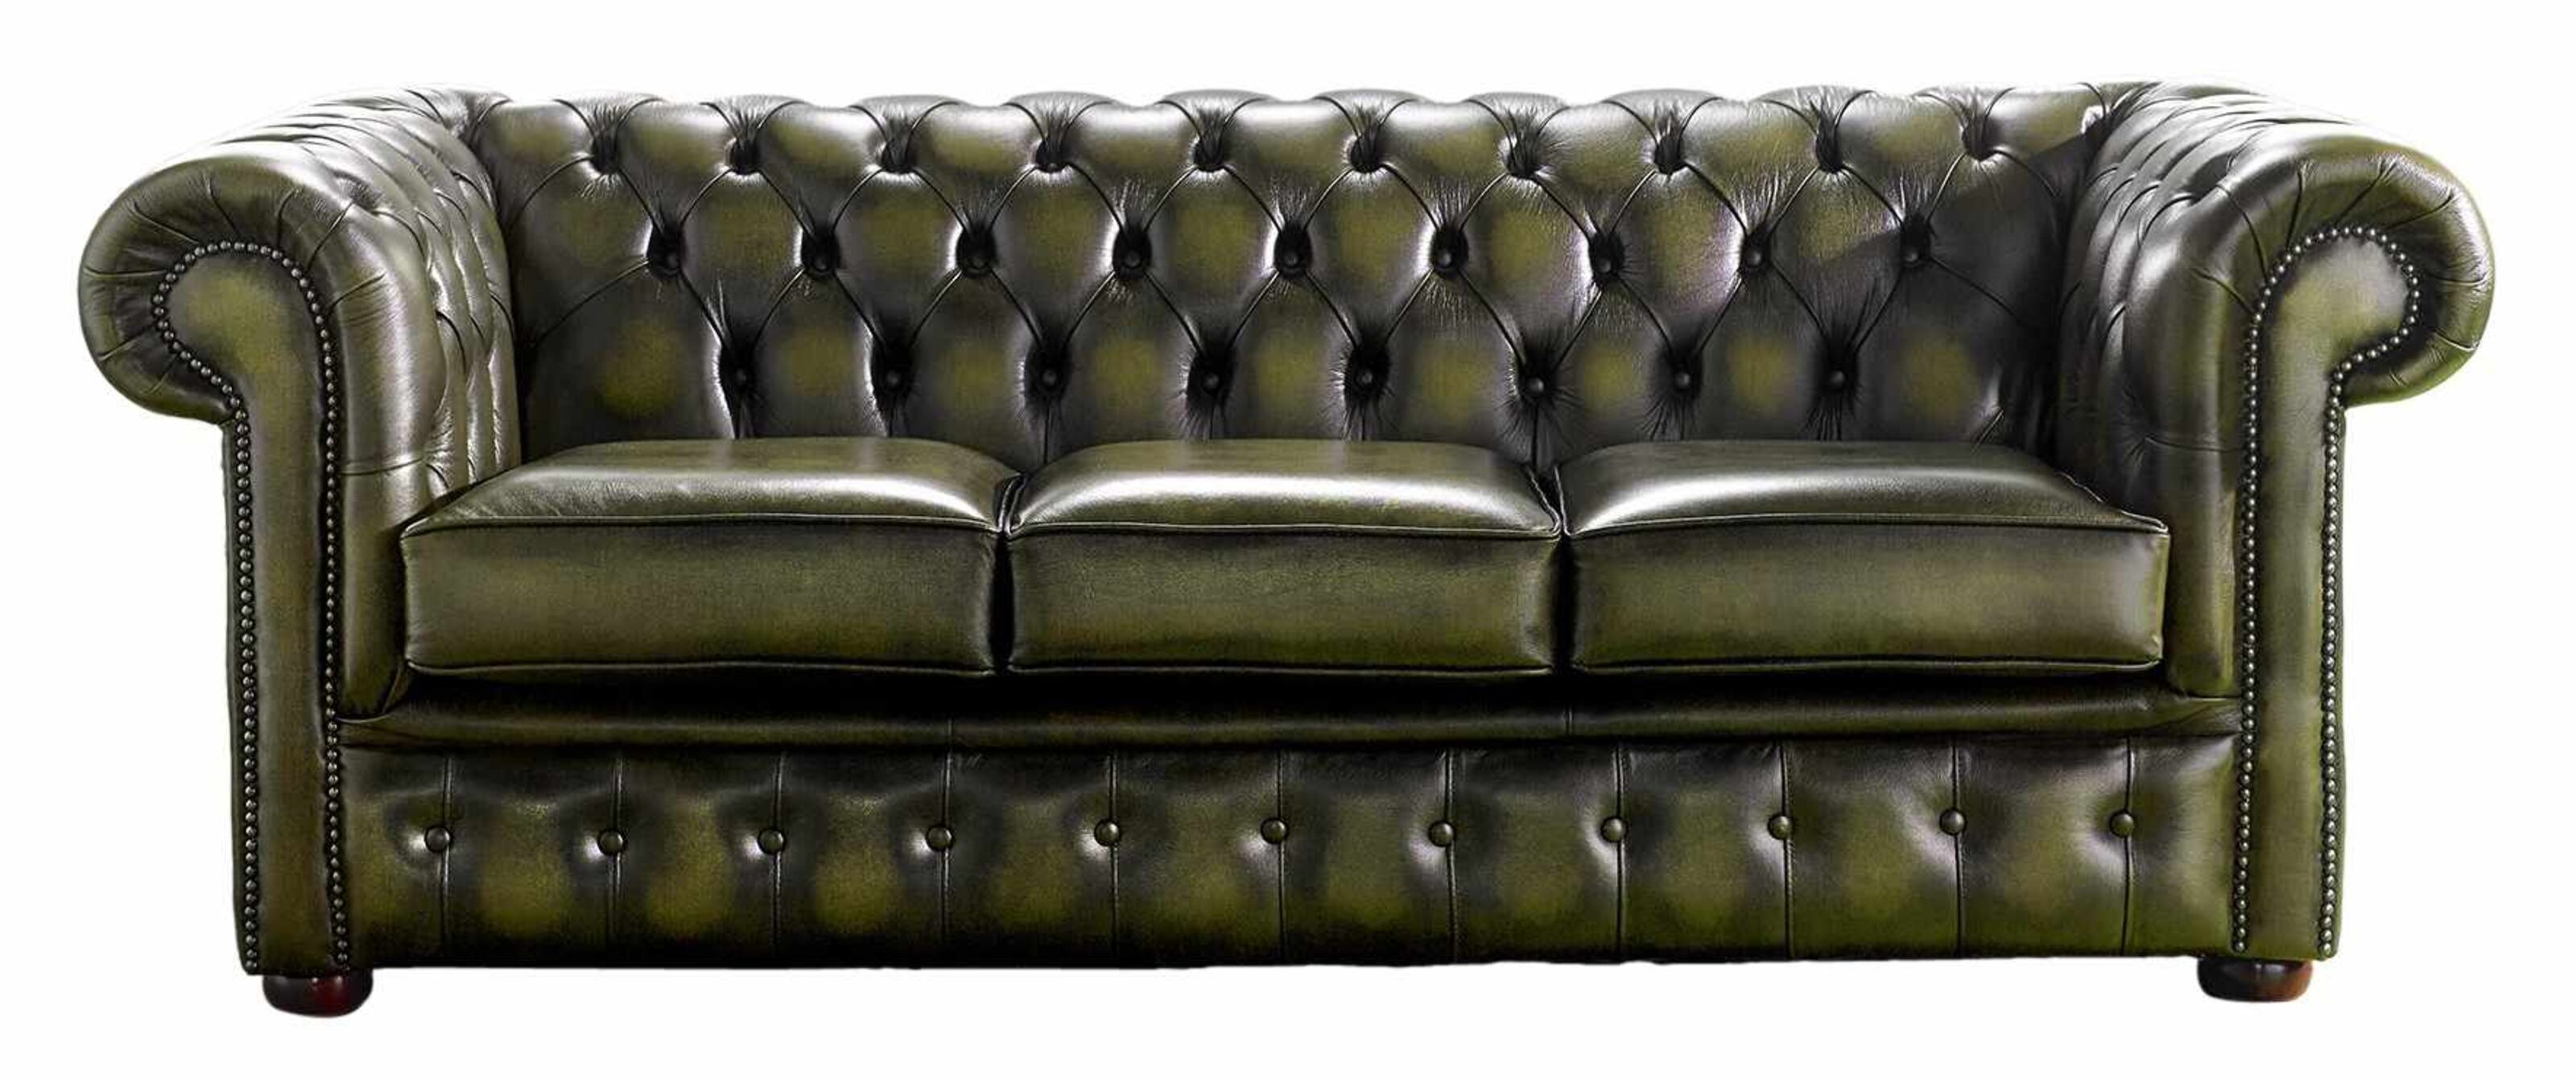 Stylish Seating Solutions: Chesterfield Sofas in Adelaide  %Post Title